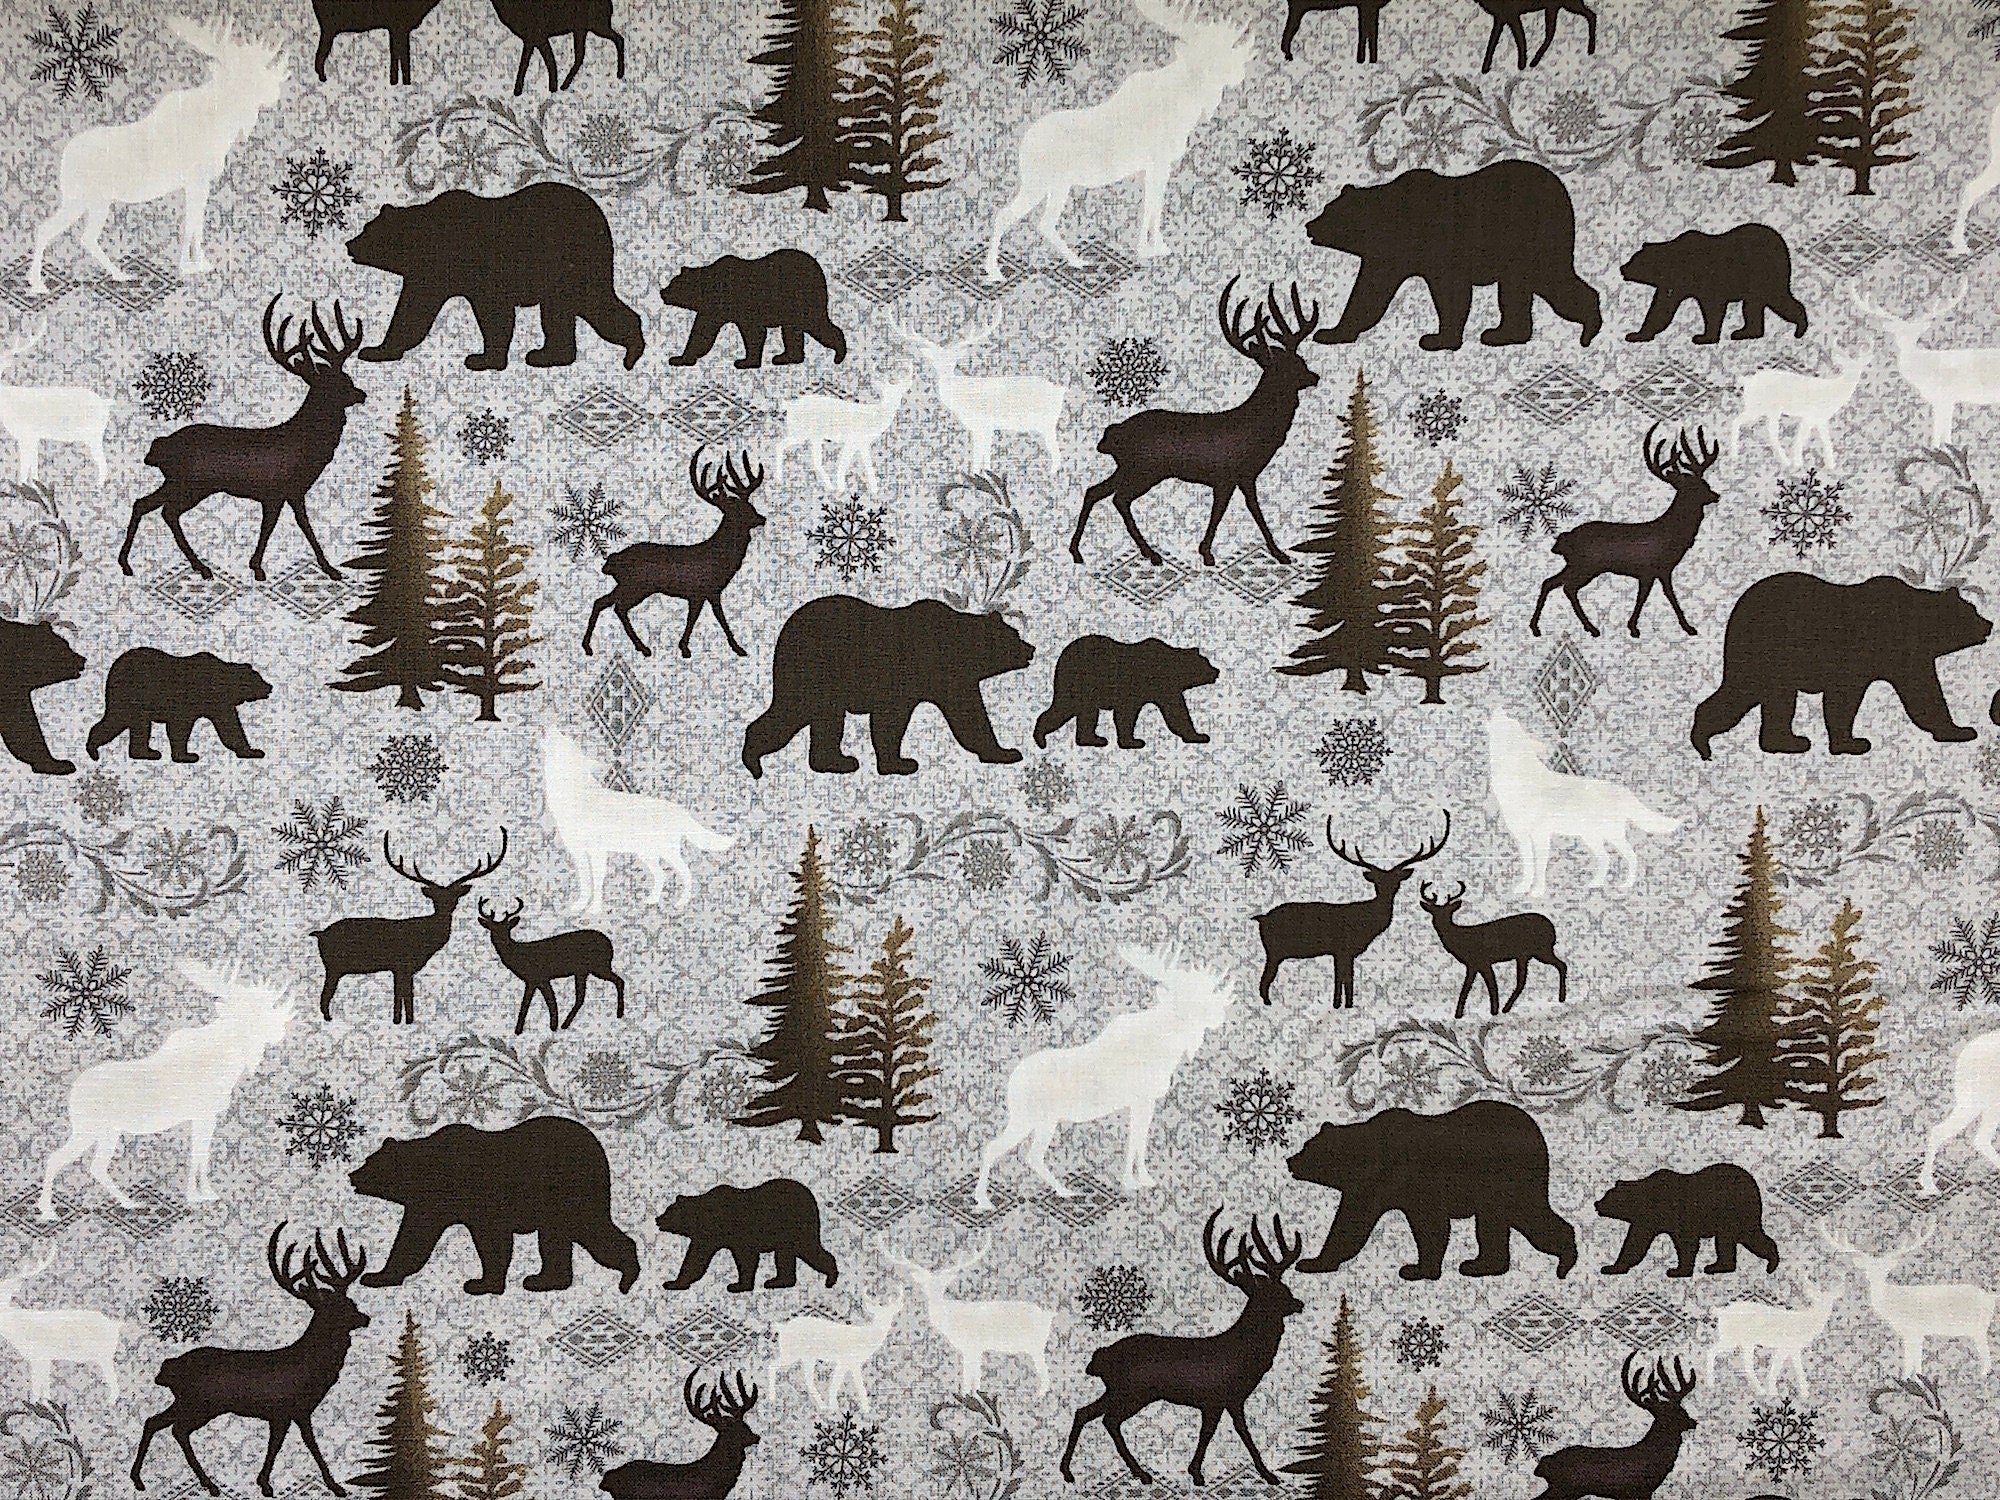 This gray fabric is called Mountain silhouette Stone and is covered with bear, deer, trees and snowflakes.